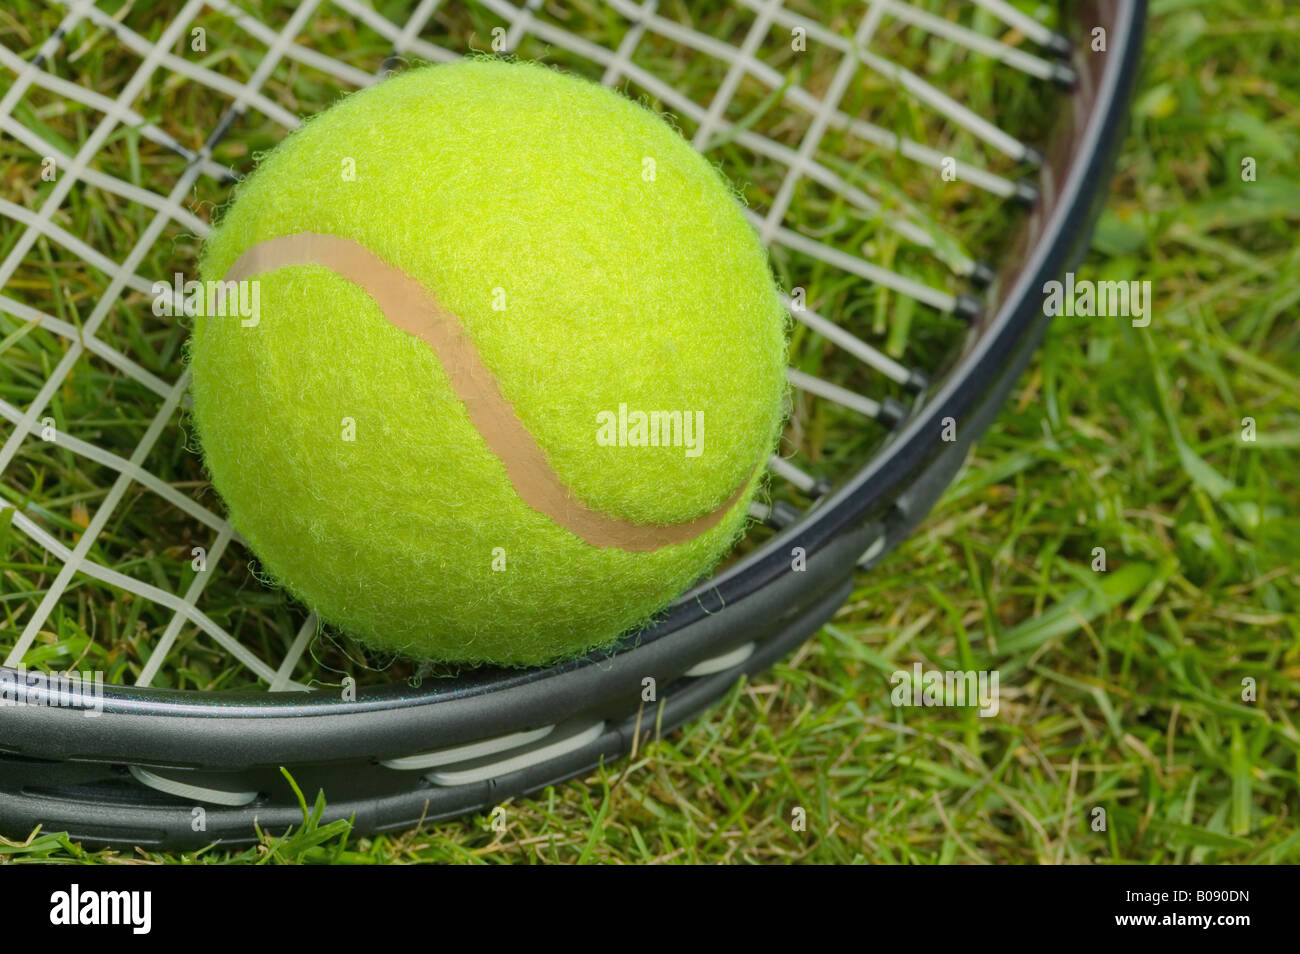 Close up of a tennis ball and racket on grass Stock Photo